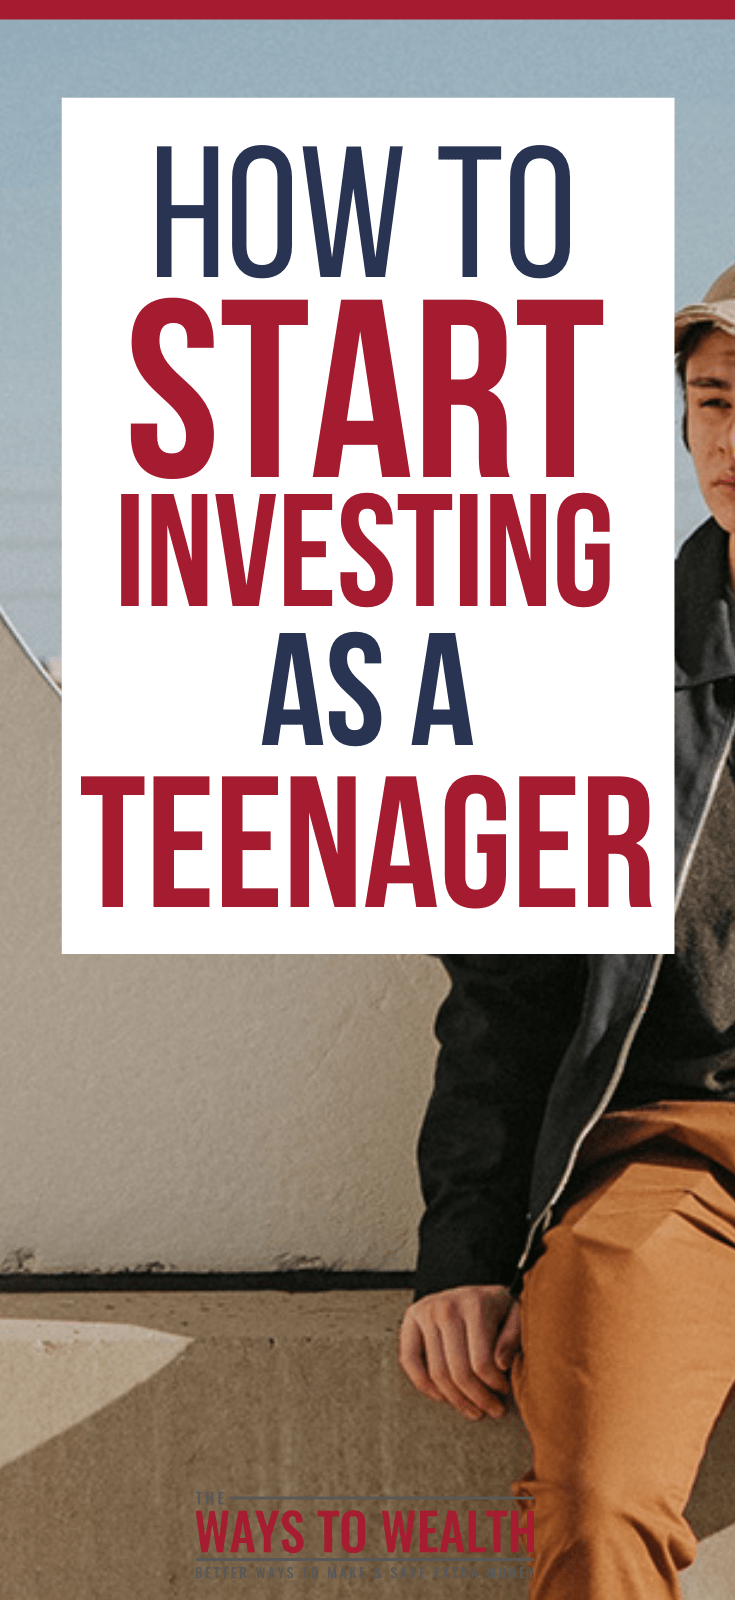 How to Start Investing as a Teenager (and Why It's a Great idea)